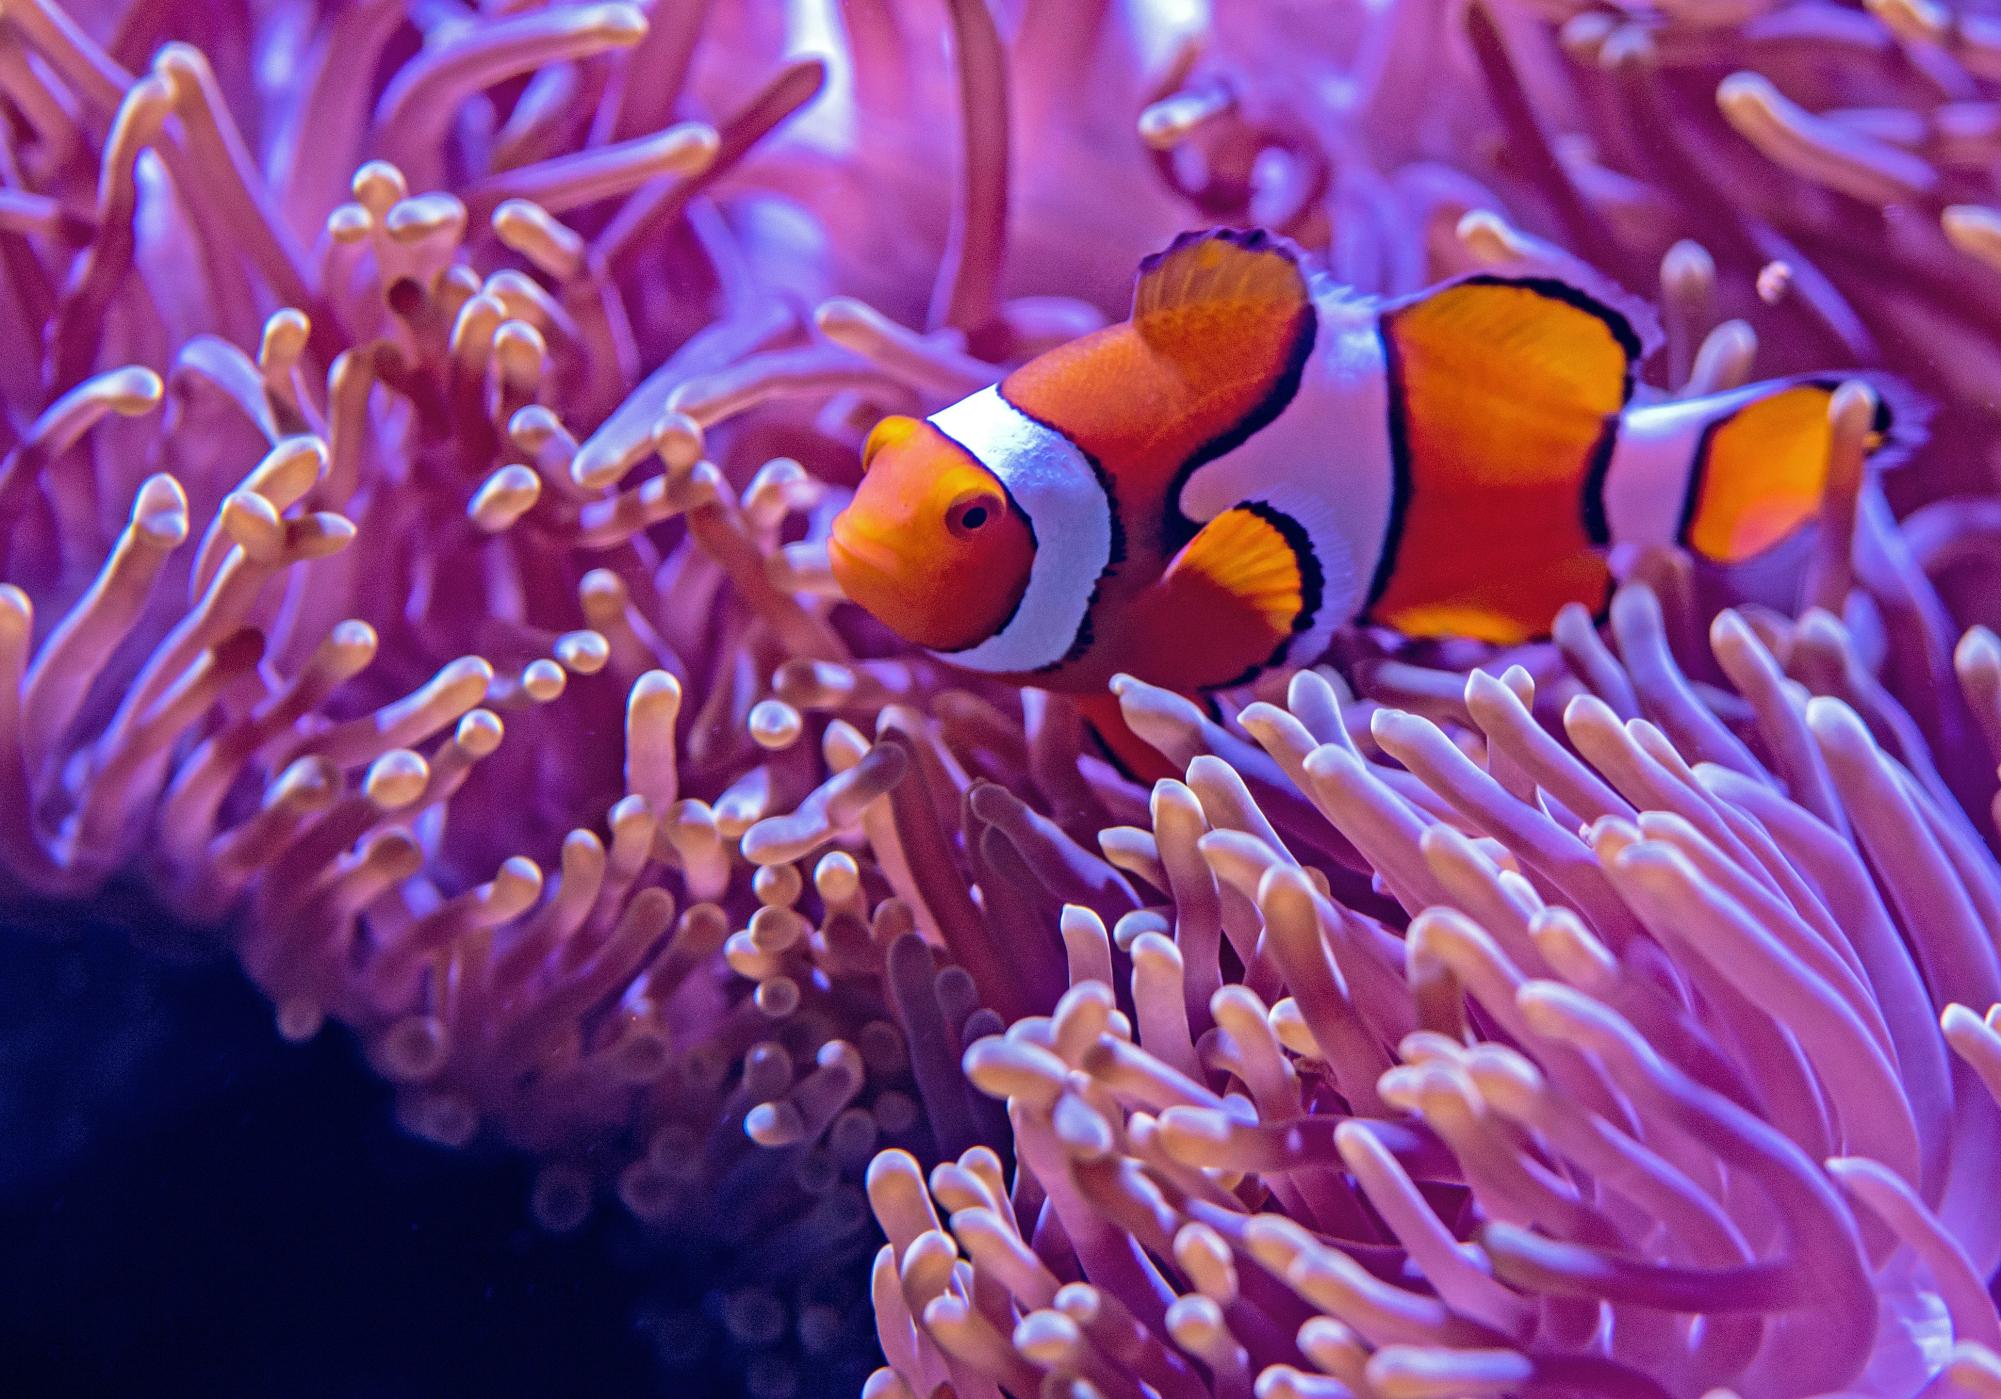 Finding Nemo Movie Review